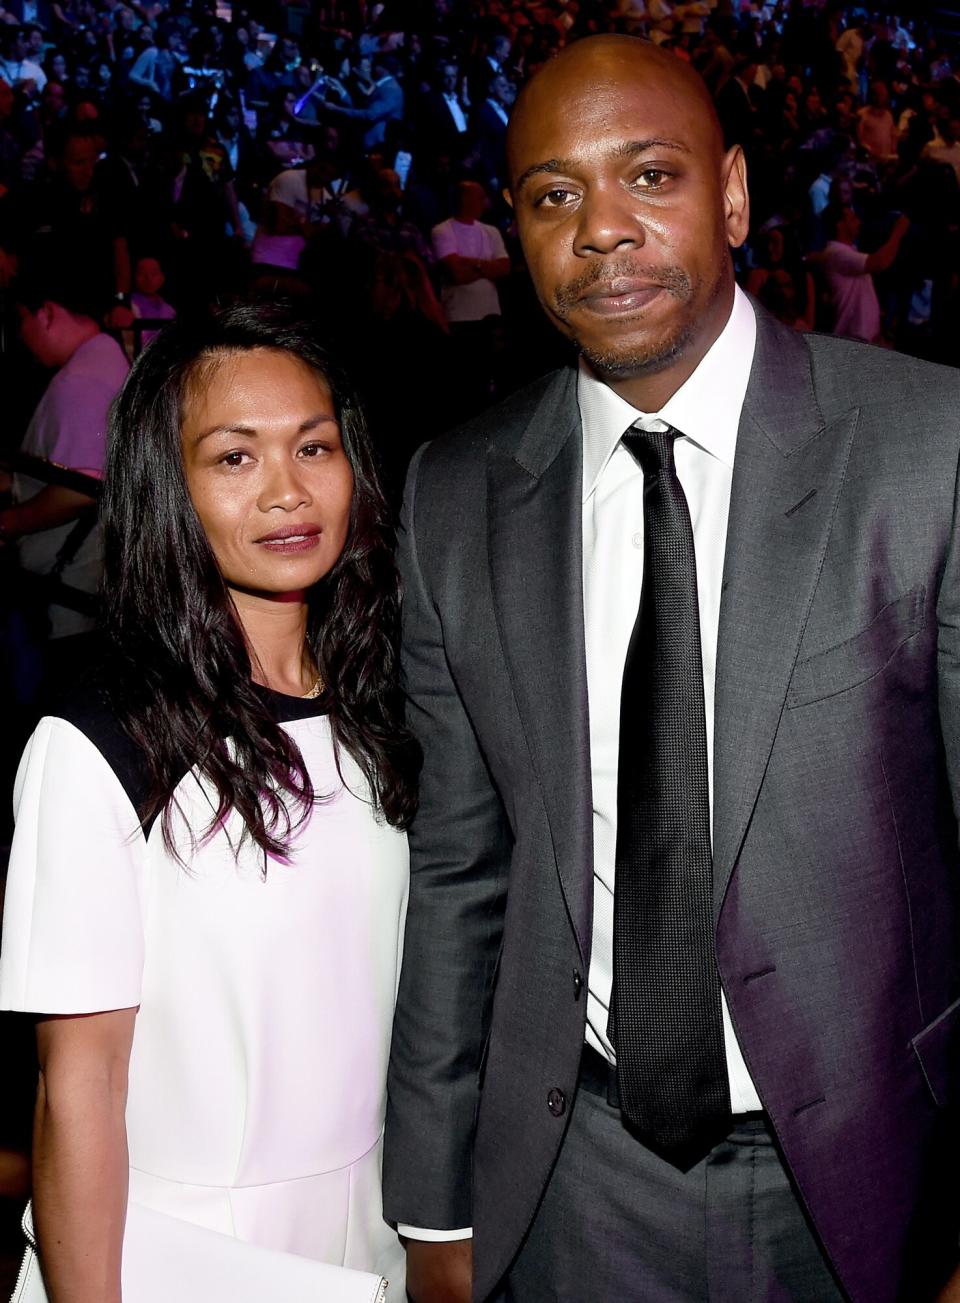 Elaine Chappelle (L) and Dave Chappelle pose ringside at "Mayweather VS Pacquiao" at MGM Grand Garden Arena on May 2, 2015 in Las Vegas, Nevada